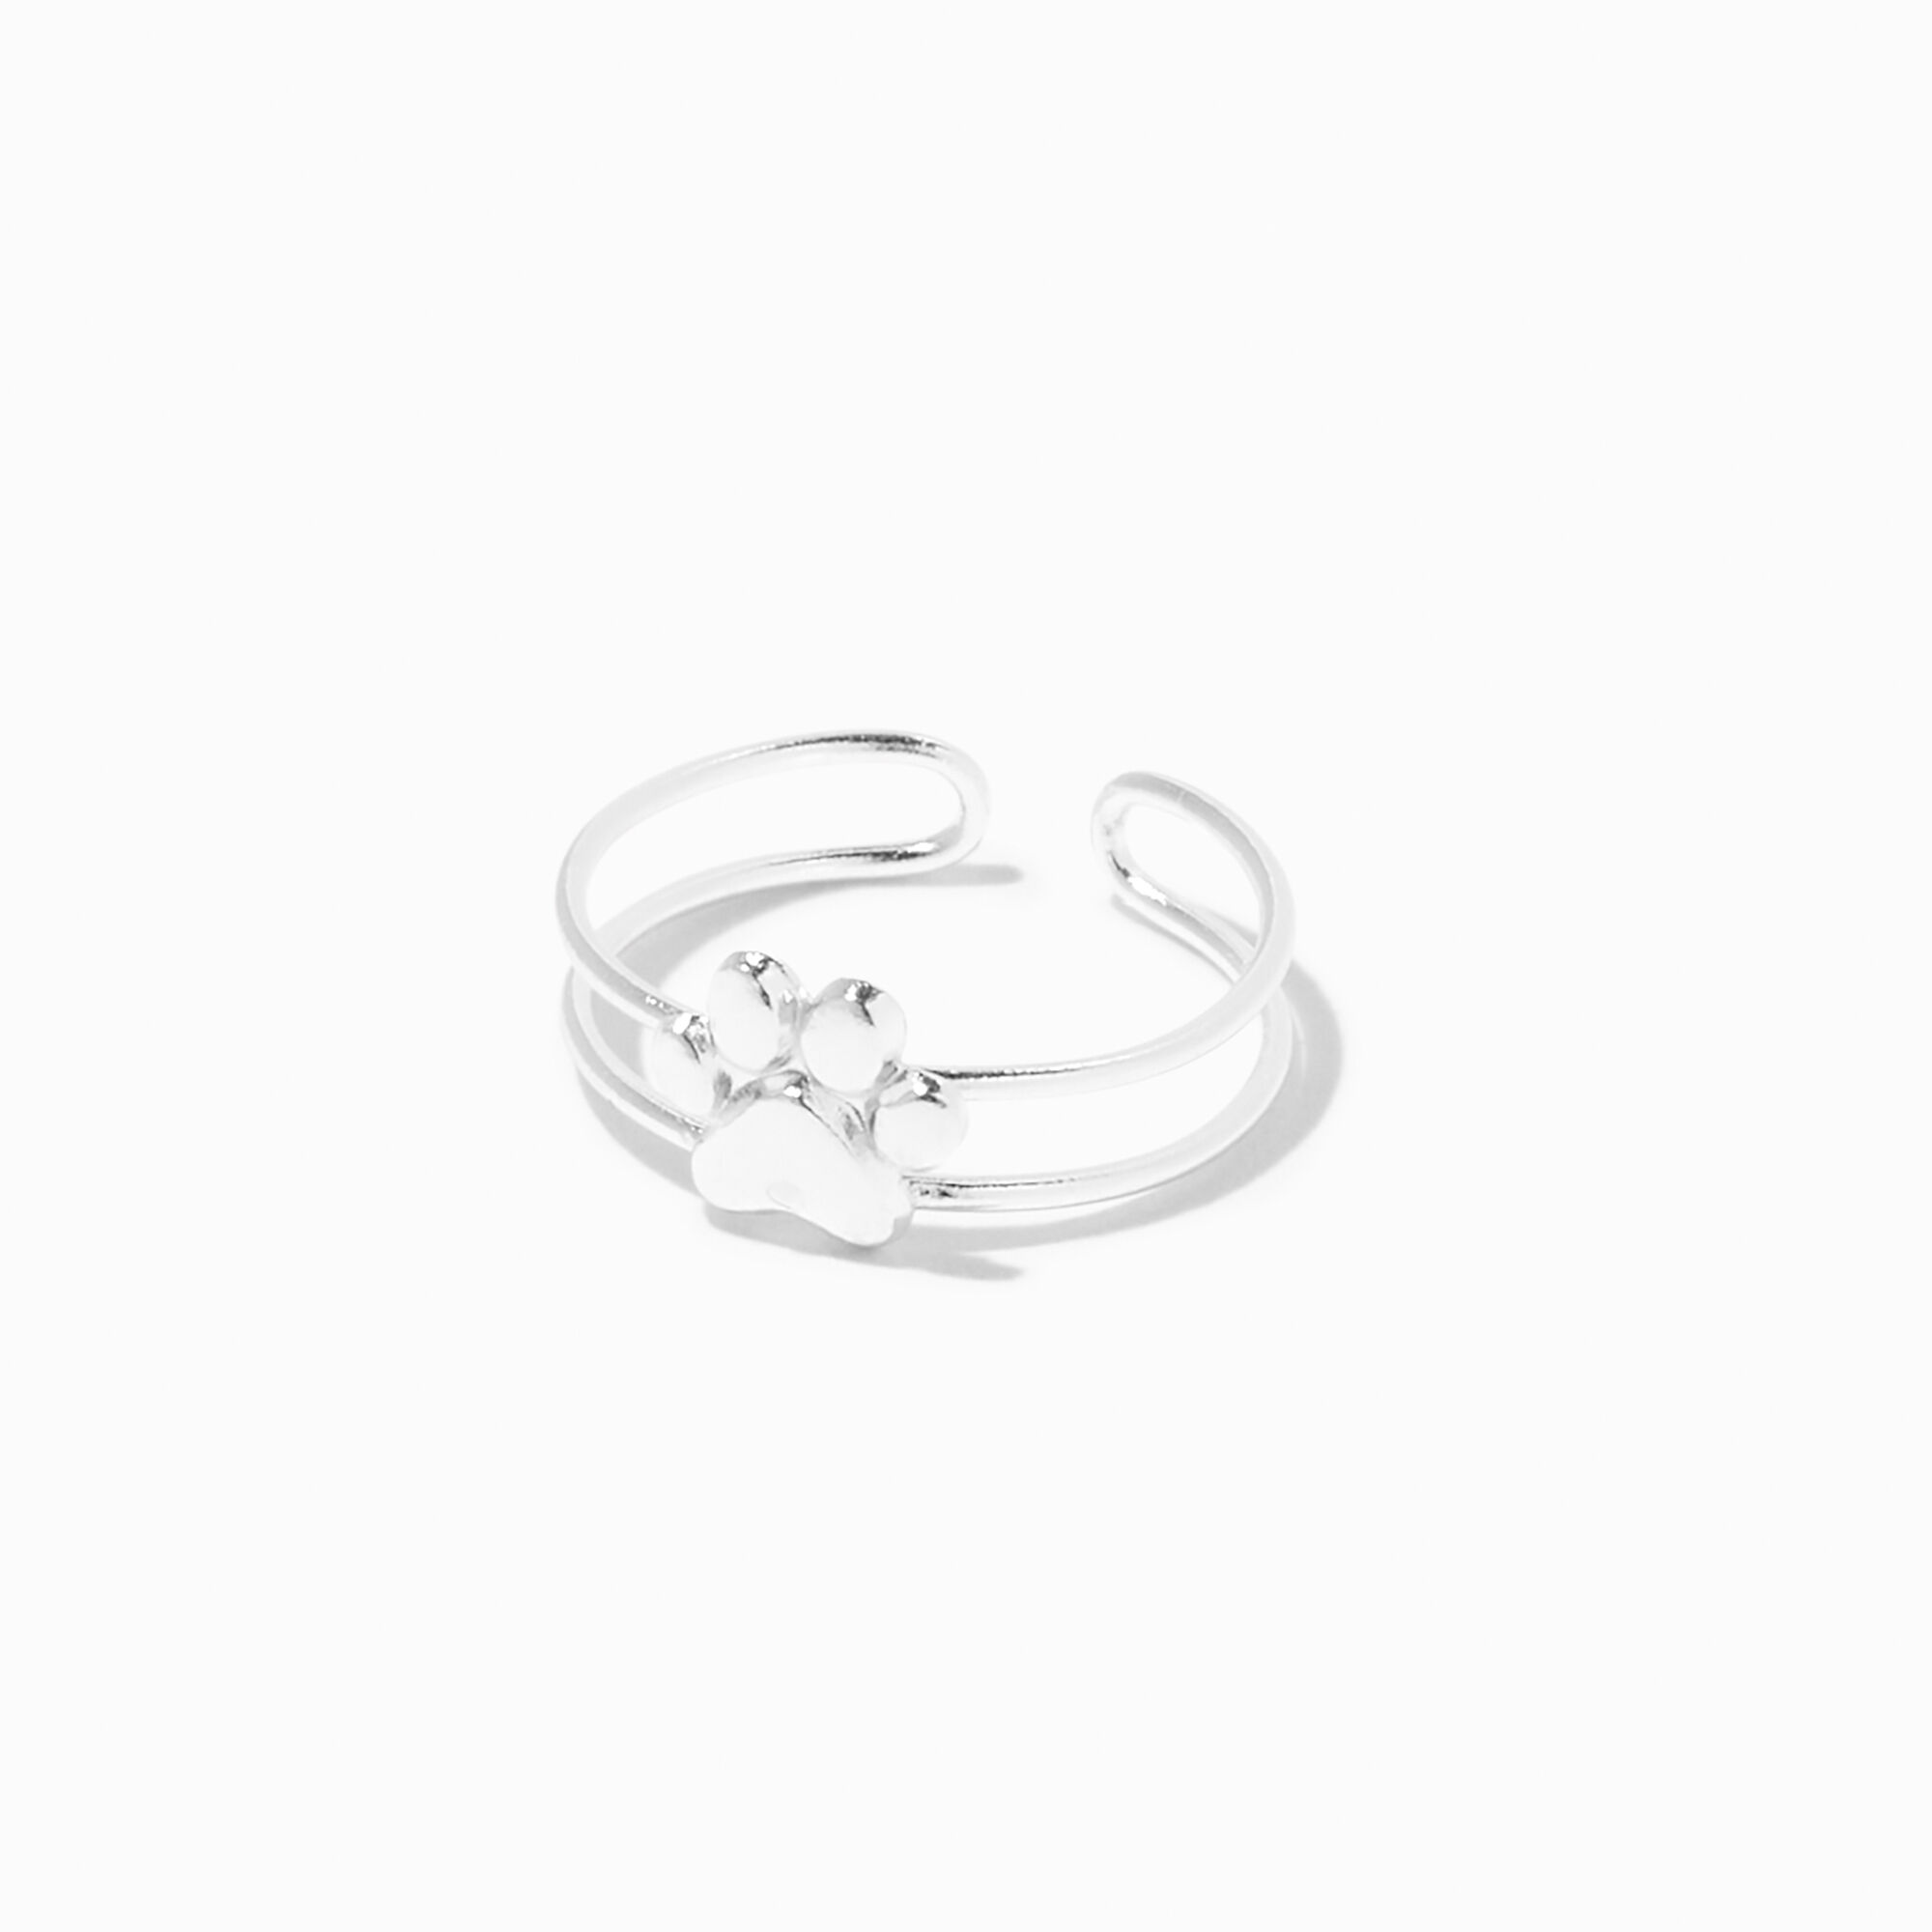 View C Luxe By Claires Paw Print Toe Ring Silver information